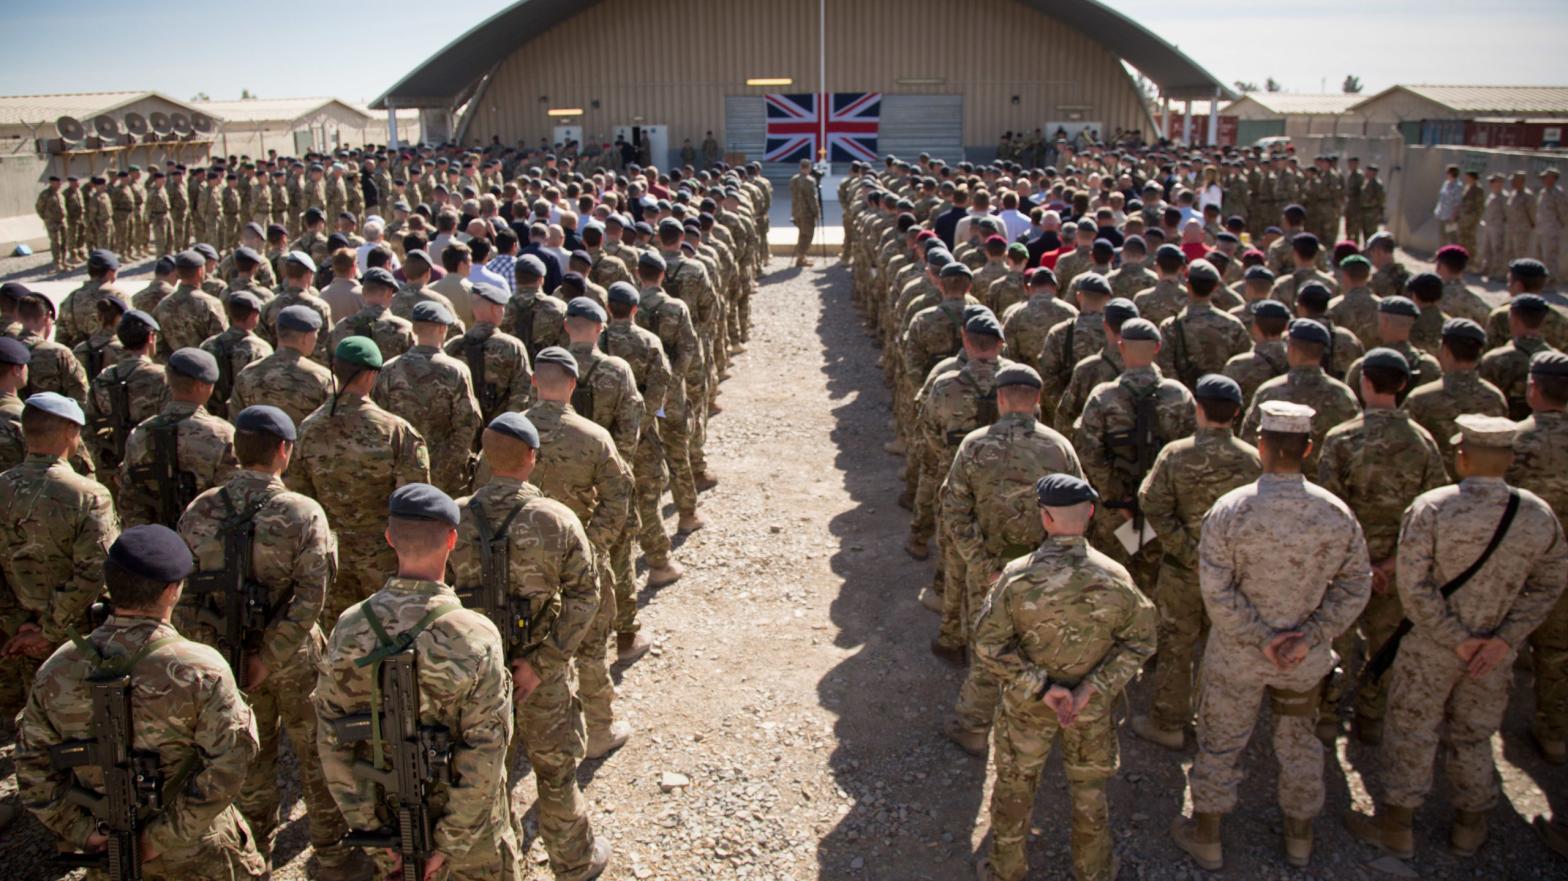 British troops and service personal remaining in Afghanistan are joined by International Security Assistance Force (ISAF) personnel and civilians as they gather for a Remembrance Sunday service at Kandahar Airfield November 9, 2014 in Kandahar, Afghanistan. (Photo: Matt Cardy, Getty Images)